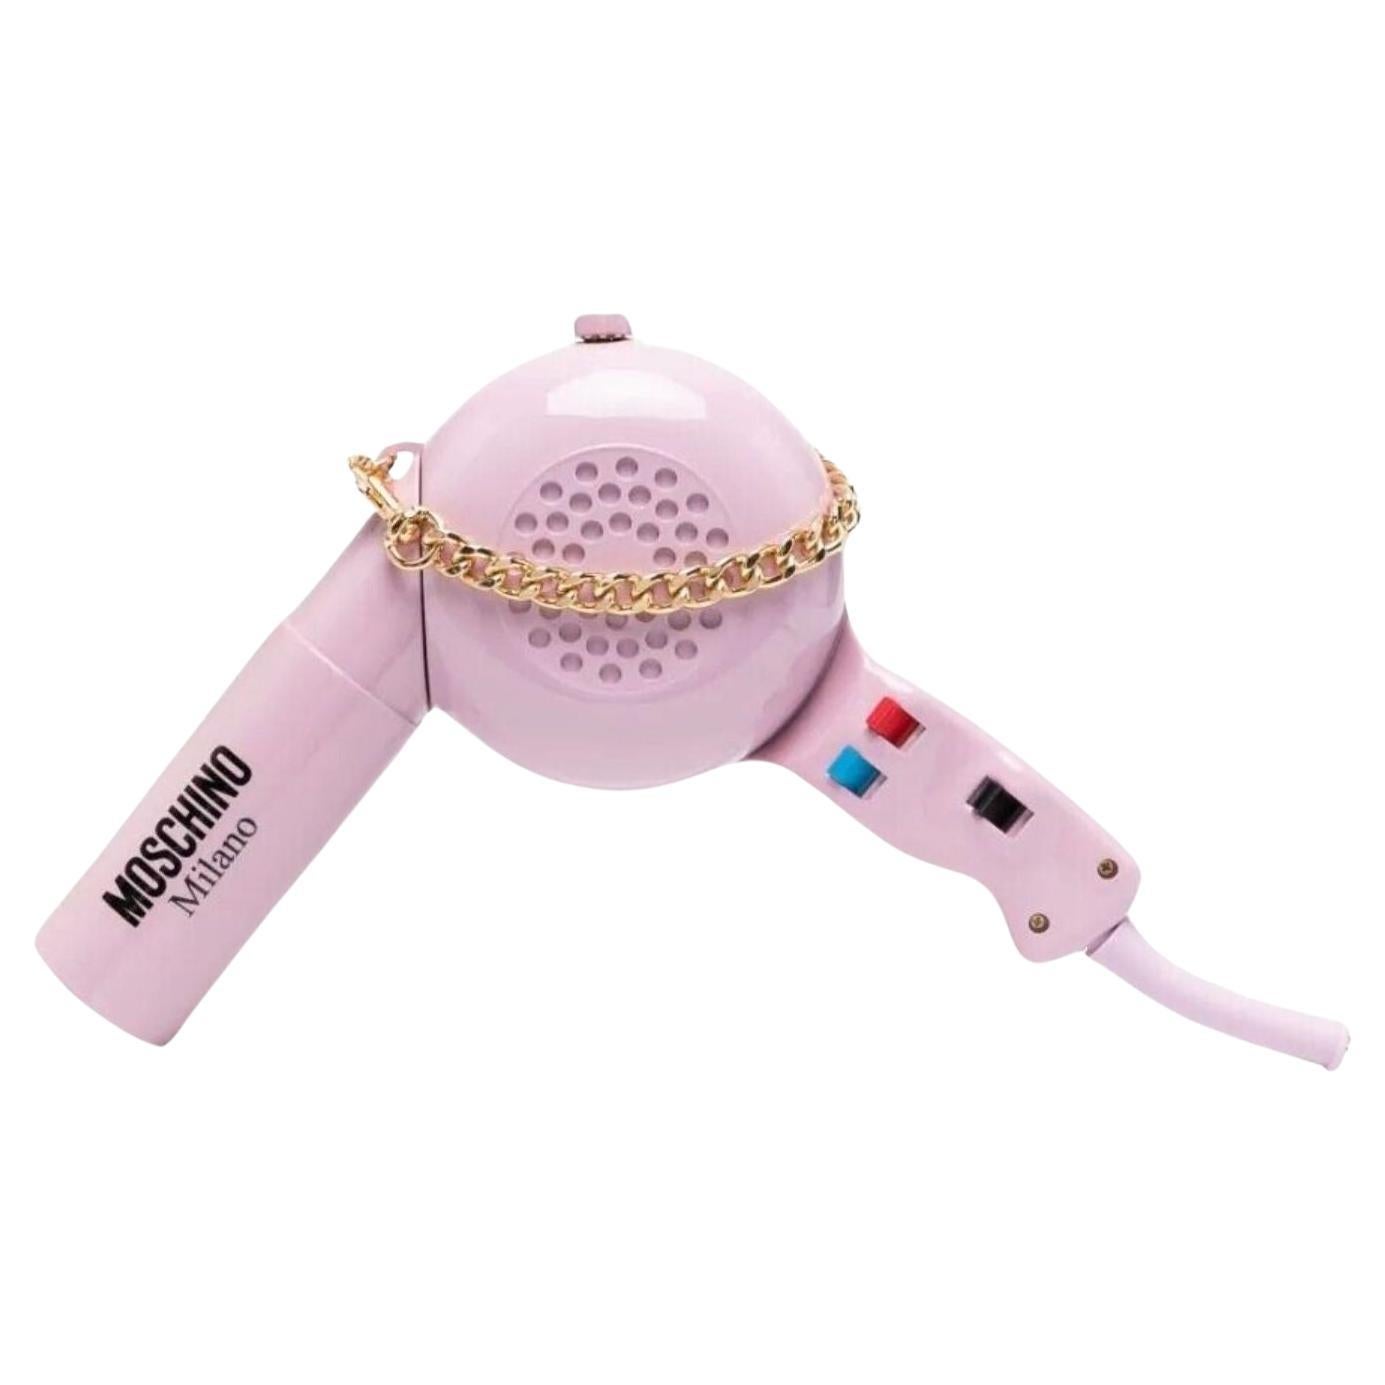 AW21 Moschino Couture Blow Dryer Mini Shoulder Bag by Jeremy Scott